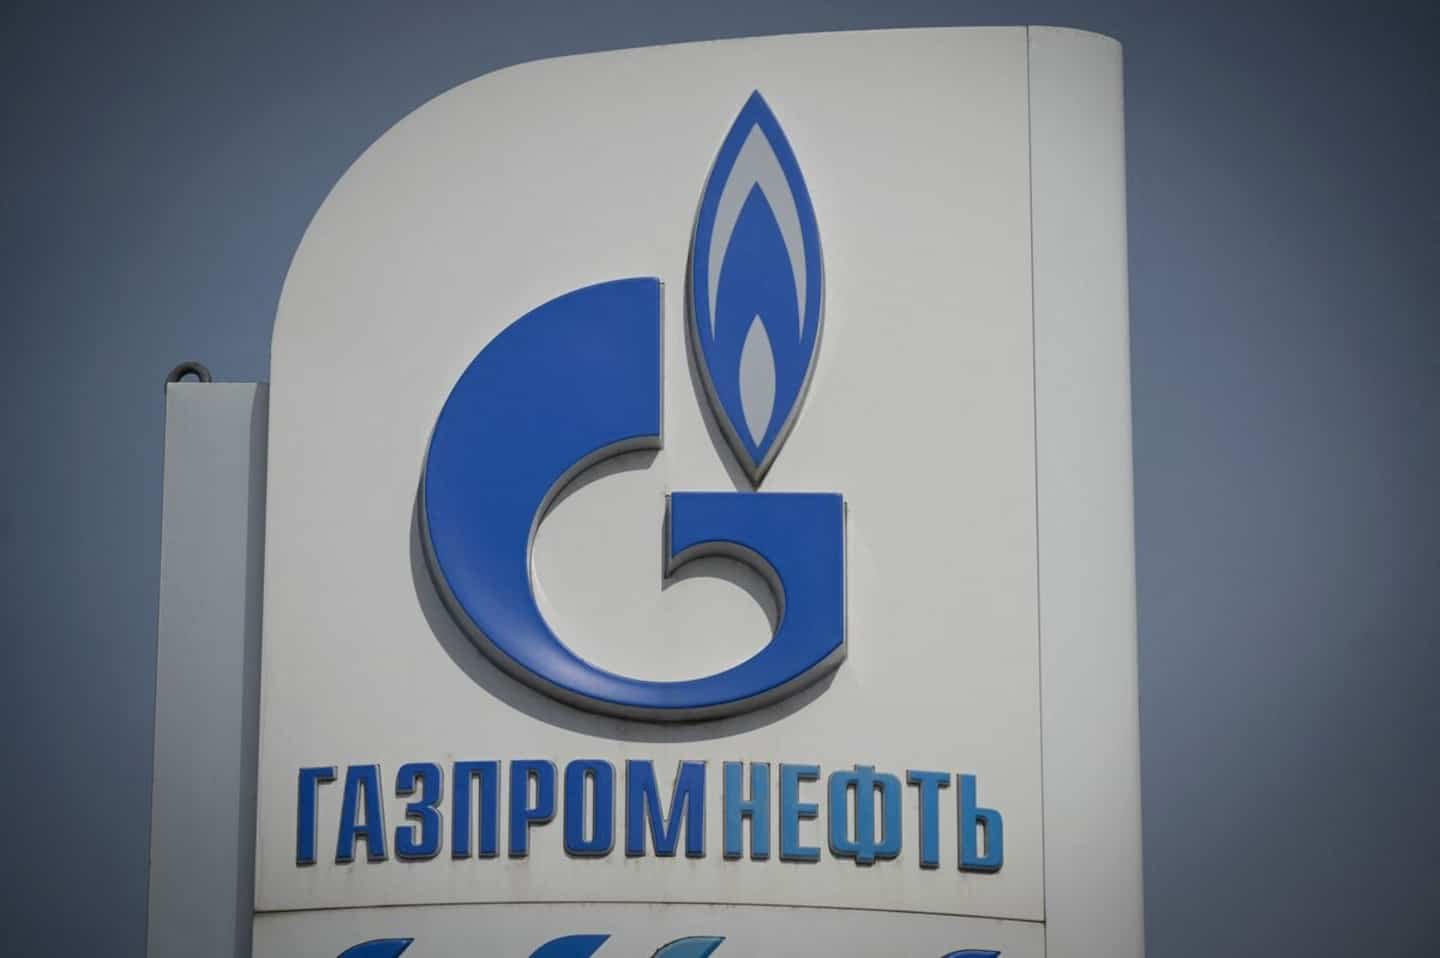 The Russian giant Gazprom will only deliver 65% of the gas requested by the Italian group ENI on Thursday